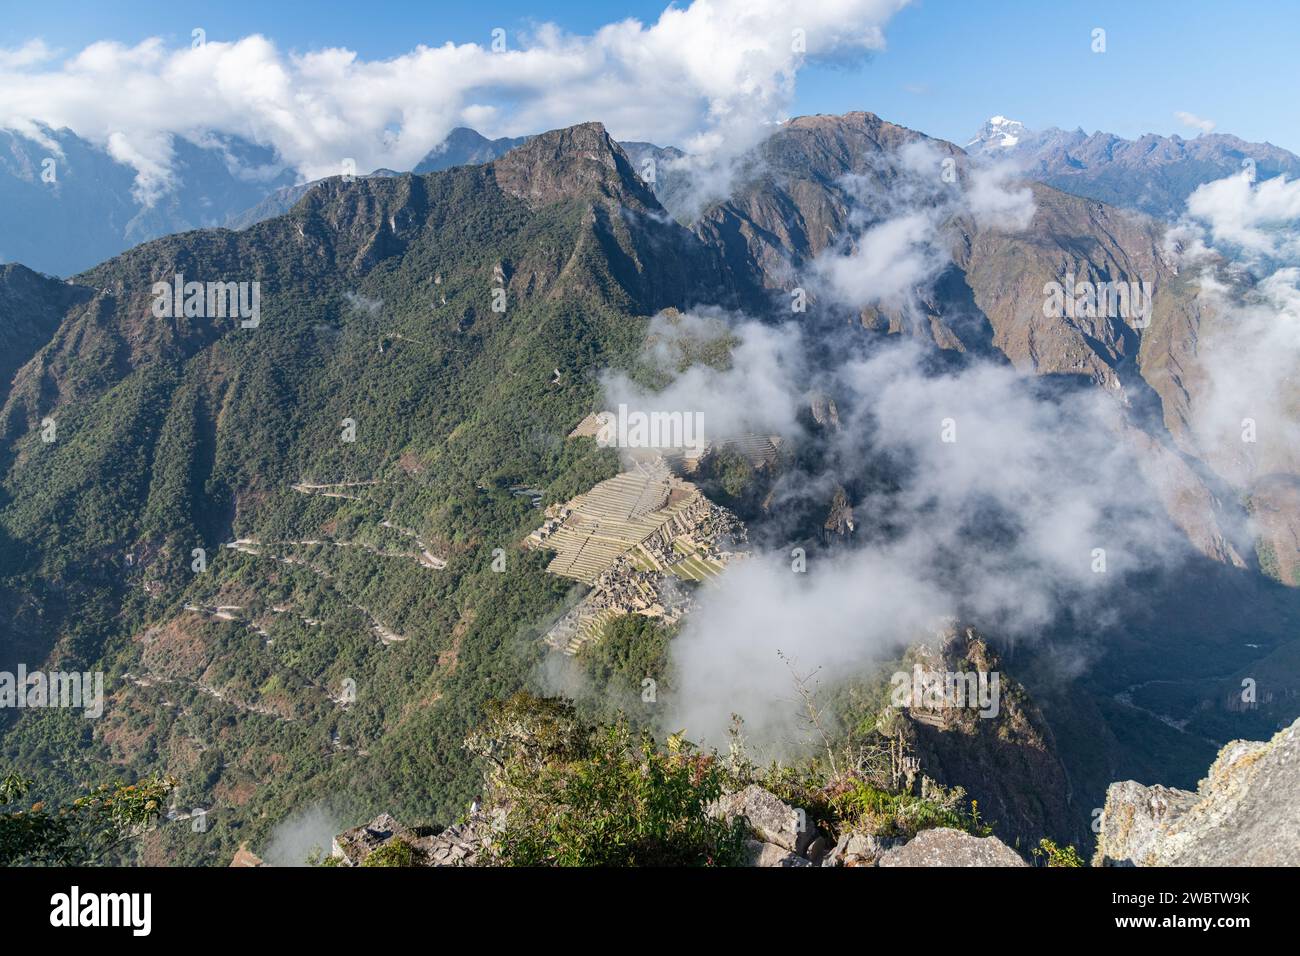 A cloudy and misty view of the Machu Picchu citadel ruins from Huayna Picchu mountain in the Sacred Valley in Peru Stock Photo